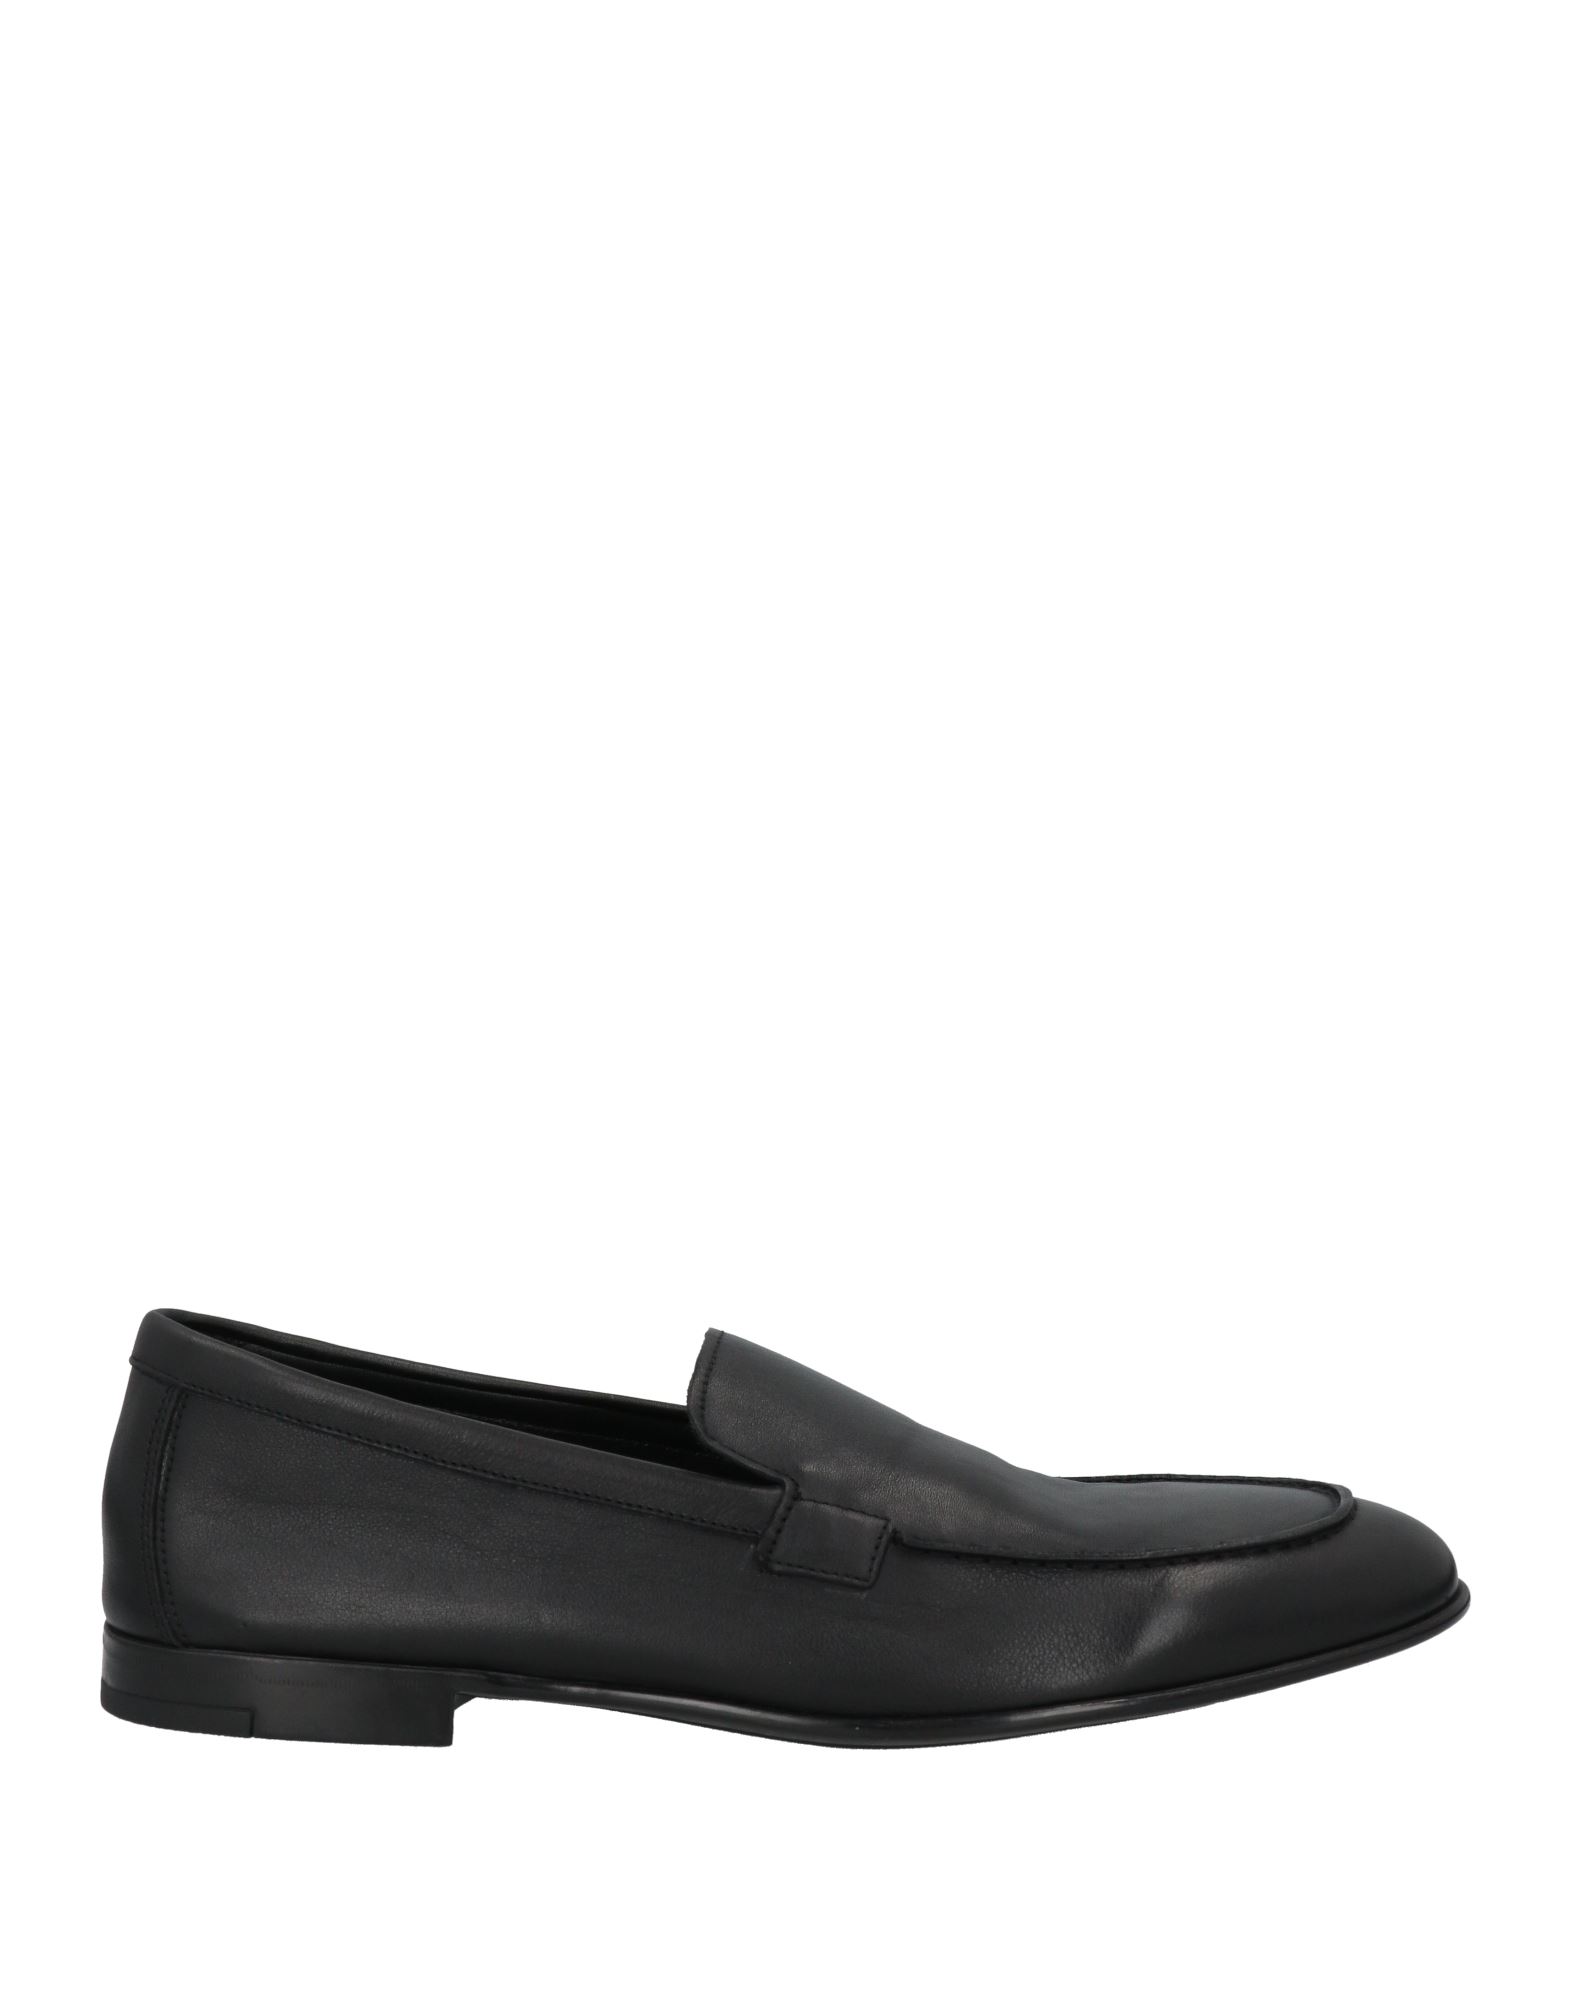 DOUCAL'S DOUCAL'S MAN LOAFERS BLACK SIZE 13 SOFT LEATHER